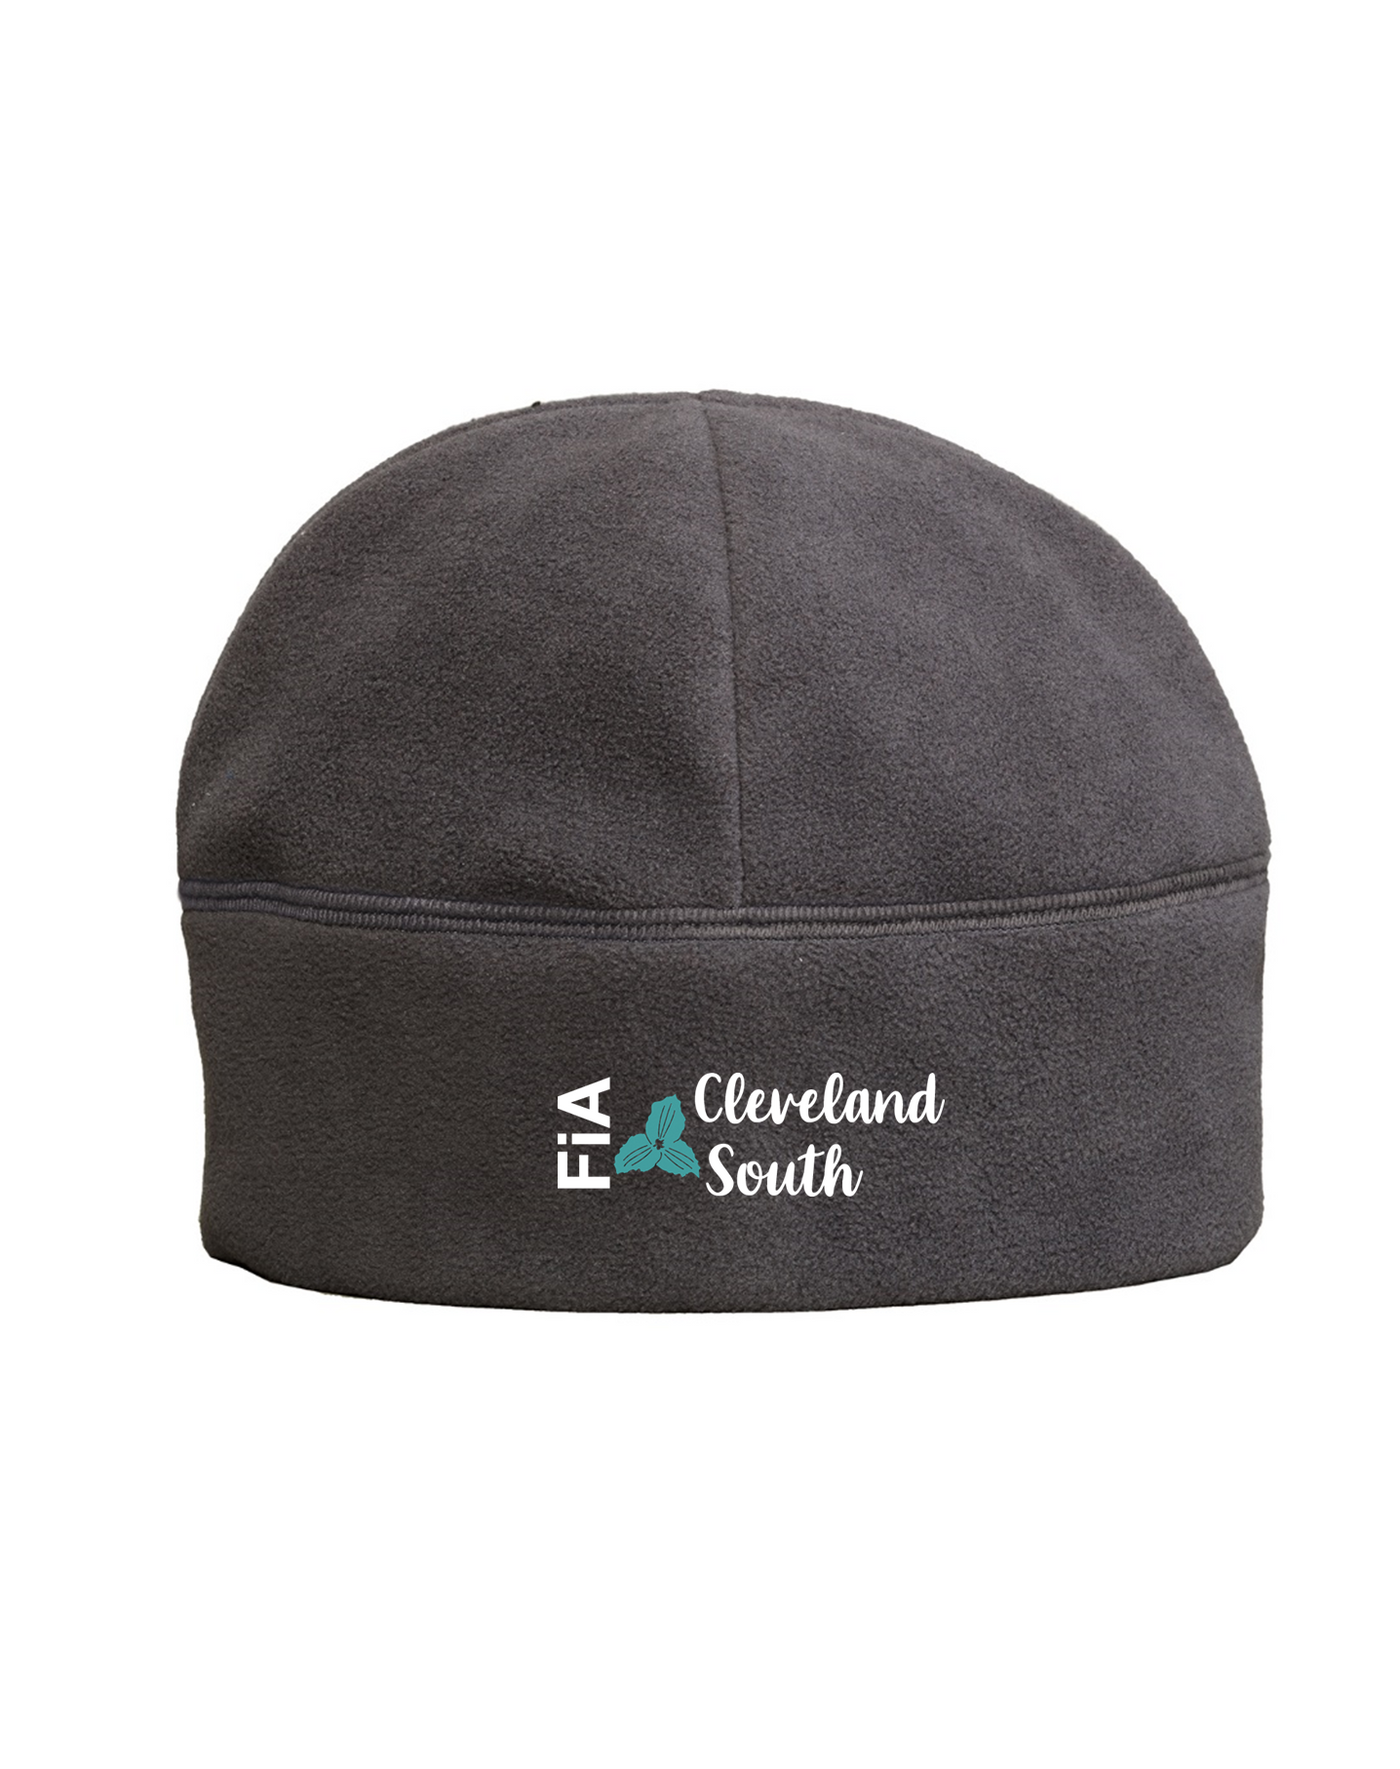 FiA Cleveland South Embroidery Pre-Order October 2022